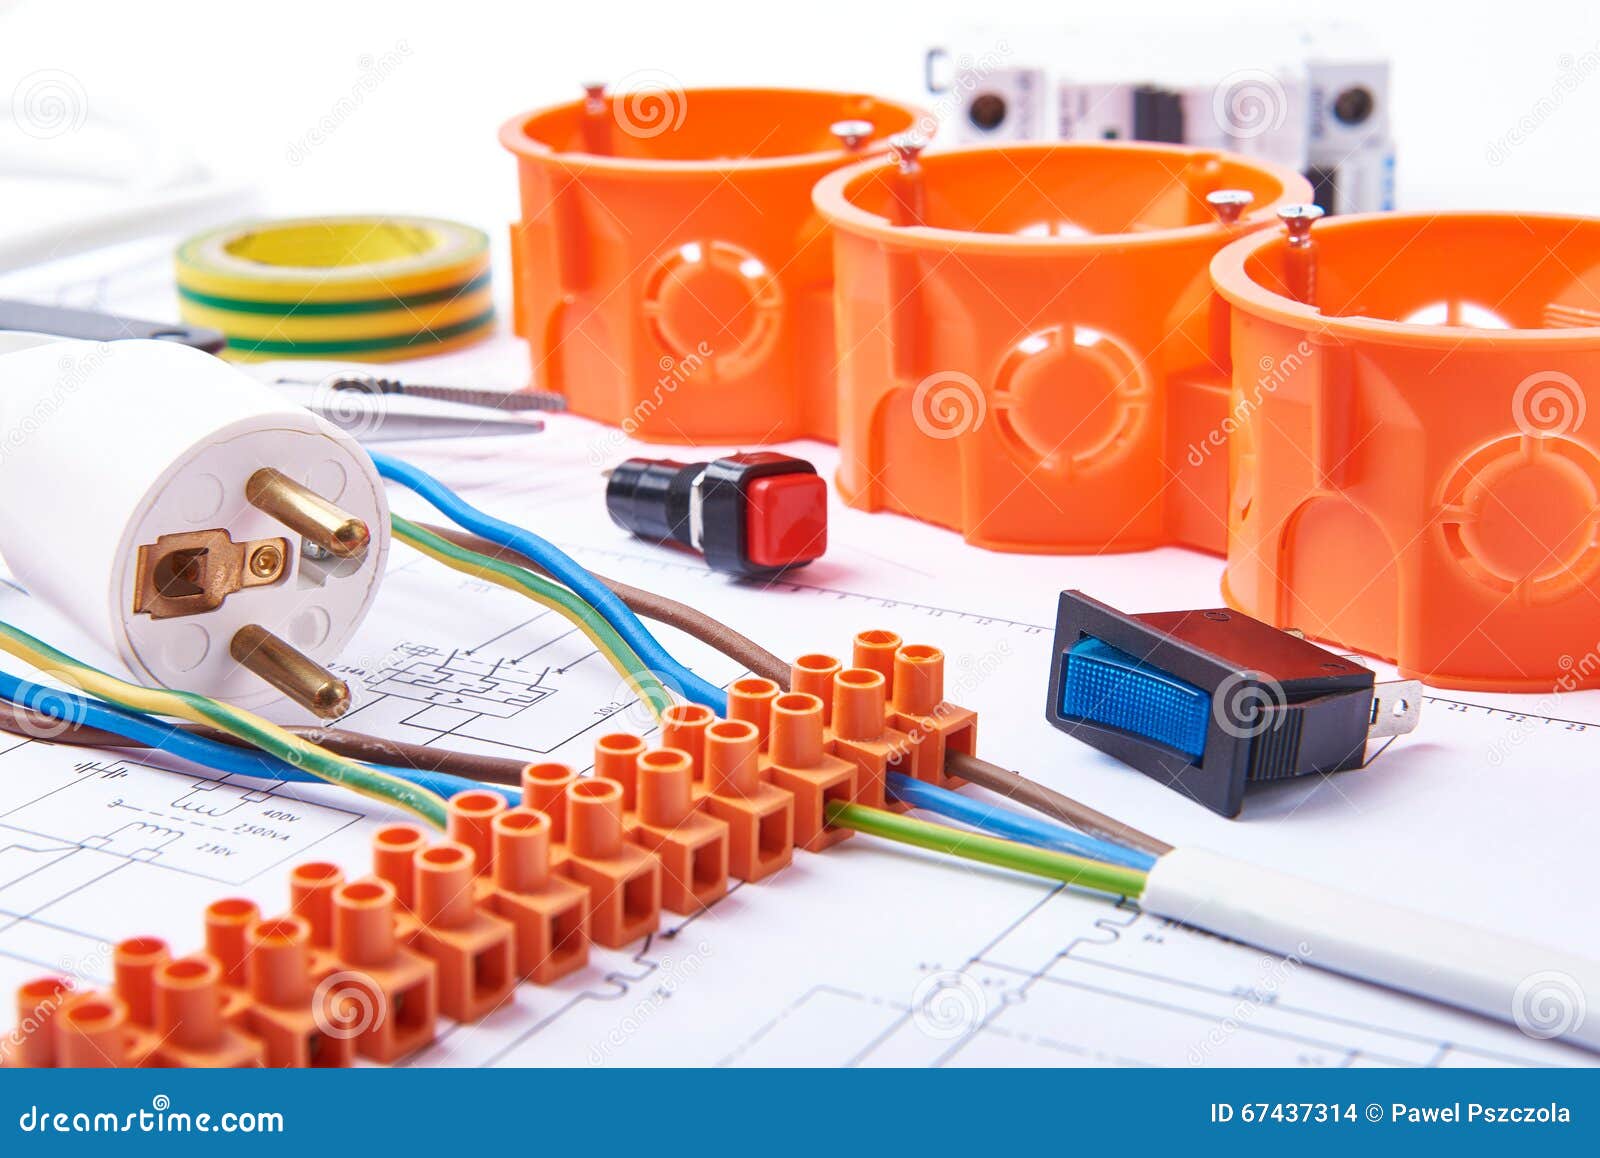 components for use in electrical installations. plug, connectors, junction box, switch, isolation tape and wires. accessories for